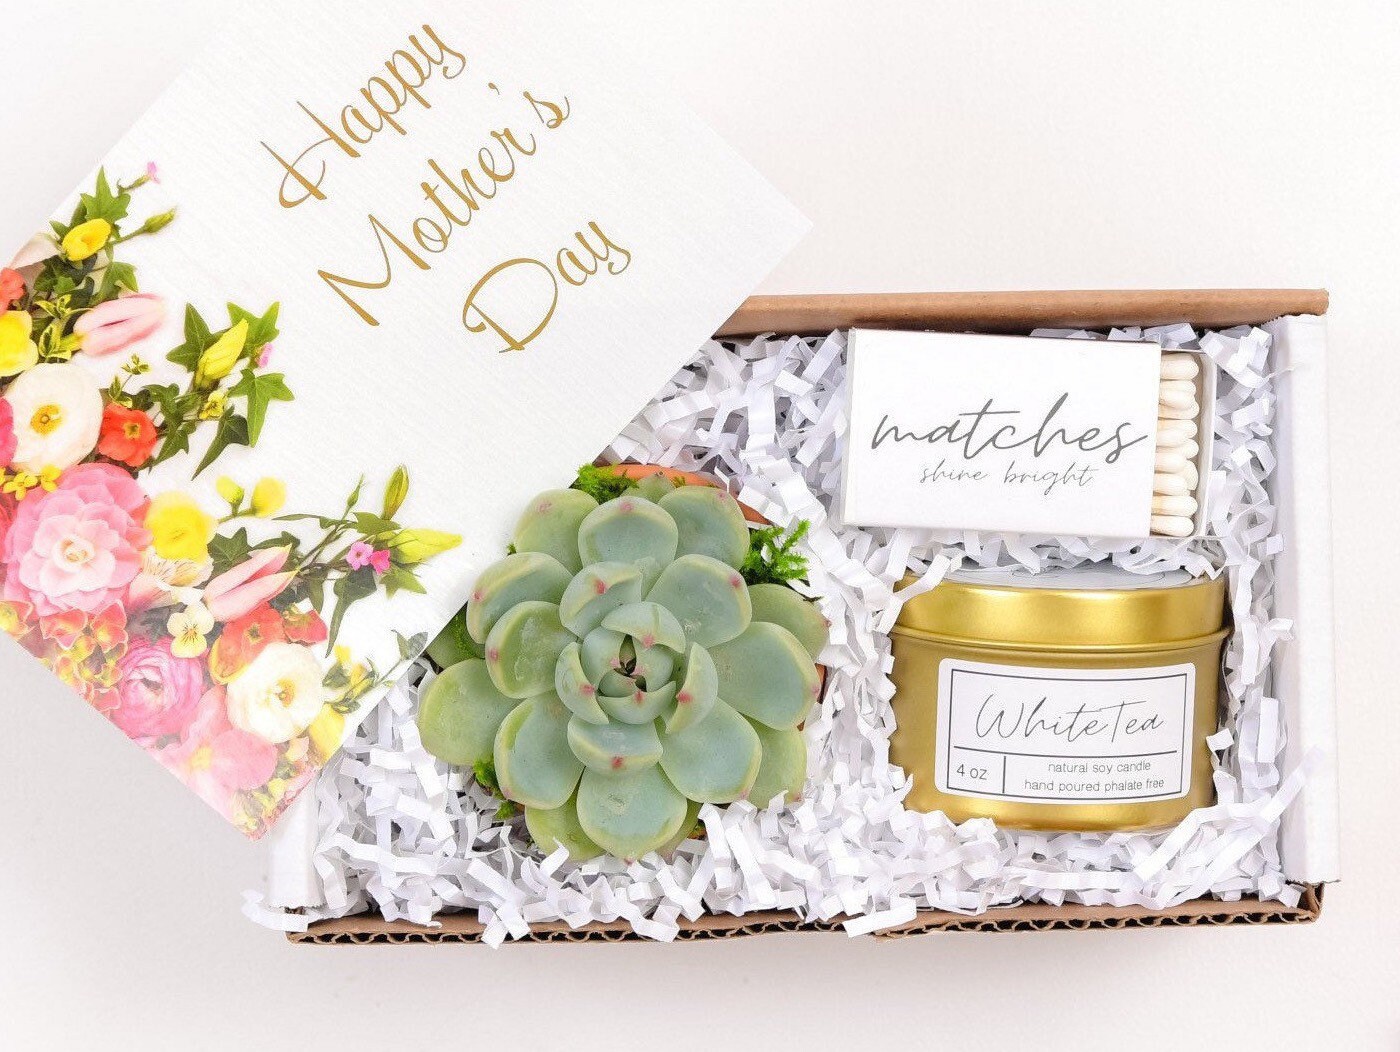 15 Meaningful Mother's Day Gifts You Haven't Thought Of Yet